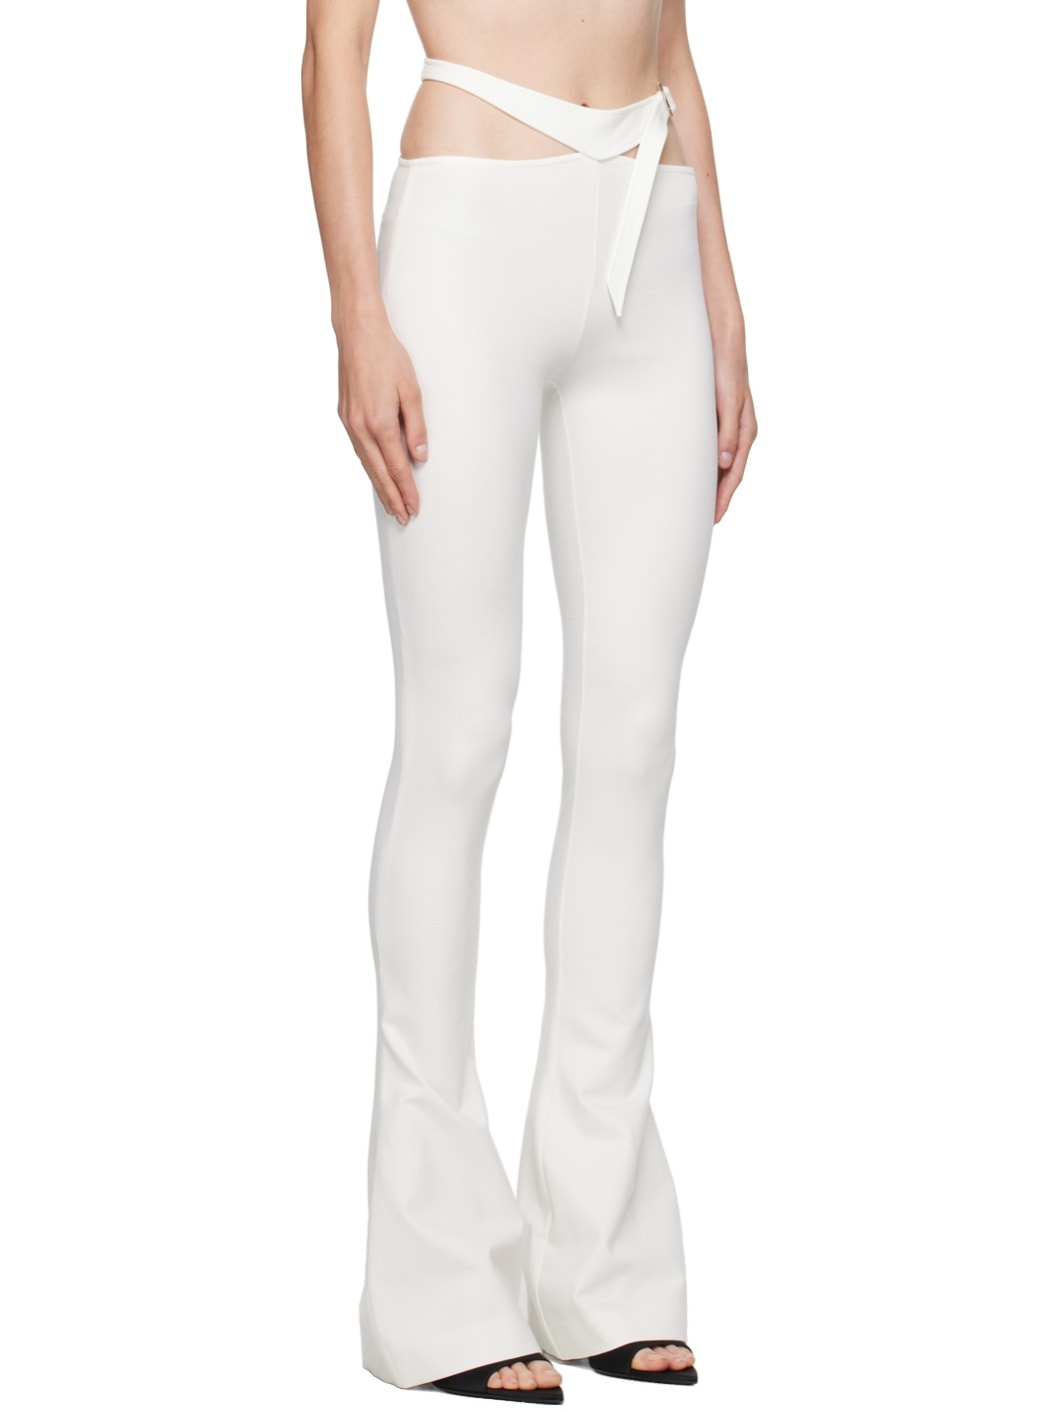 Off-White Pin-Buckle Pants - 2